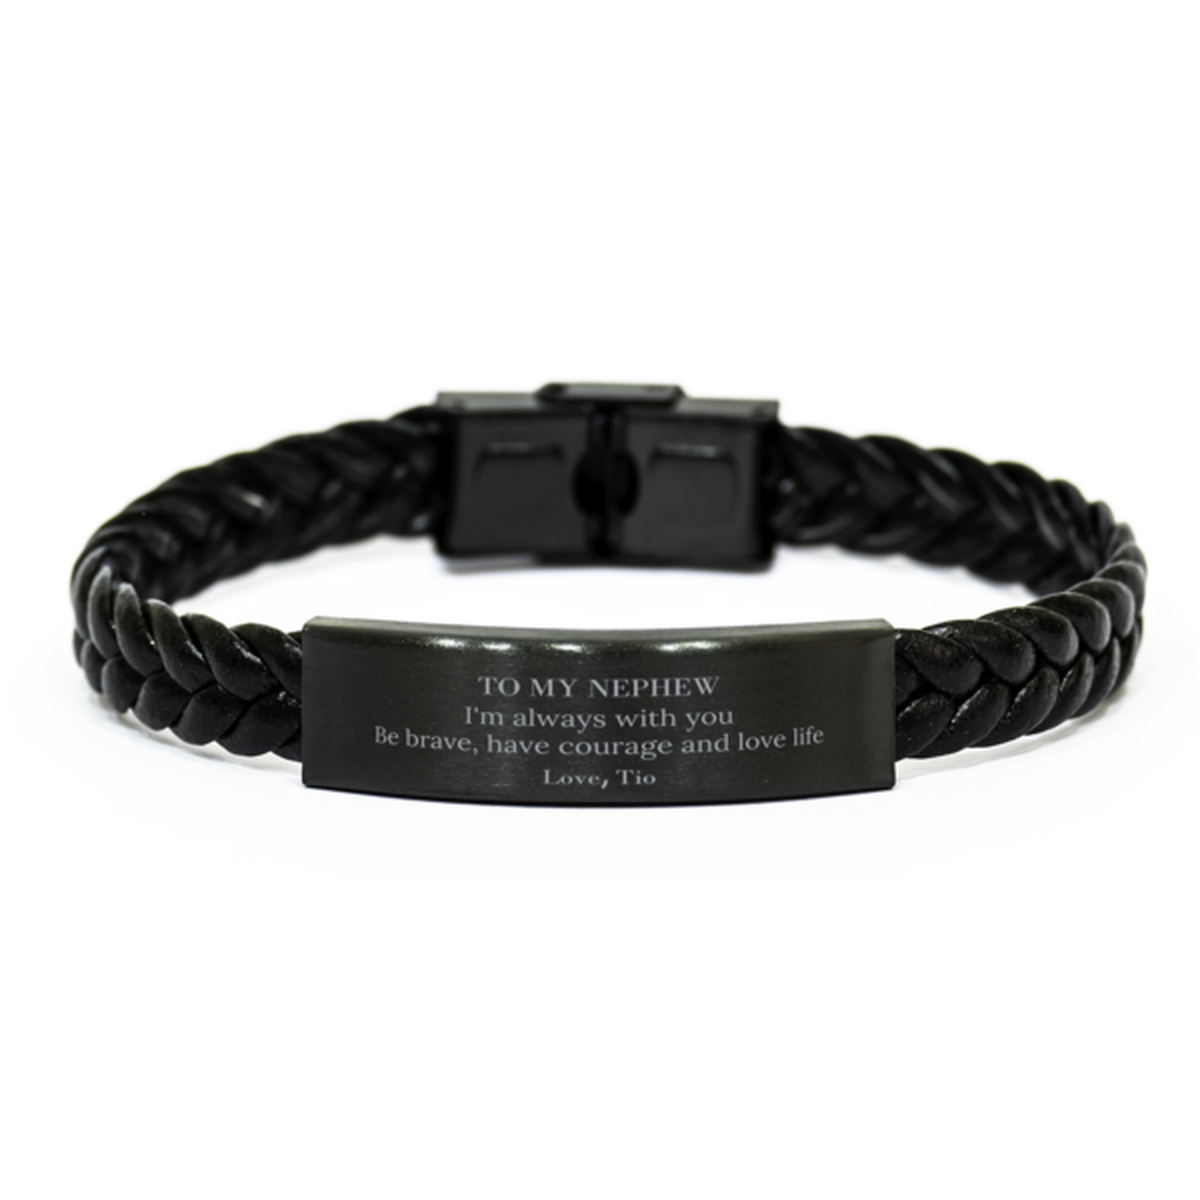 To My Nephew Gifts from Tio, Unique Braided Leather Bracelet Inspirational Christmas Birthday Graduation Gifts for Nephew I'm always with you. Be brave, have courage and love life. Love, Tio